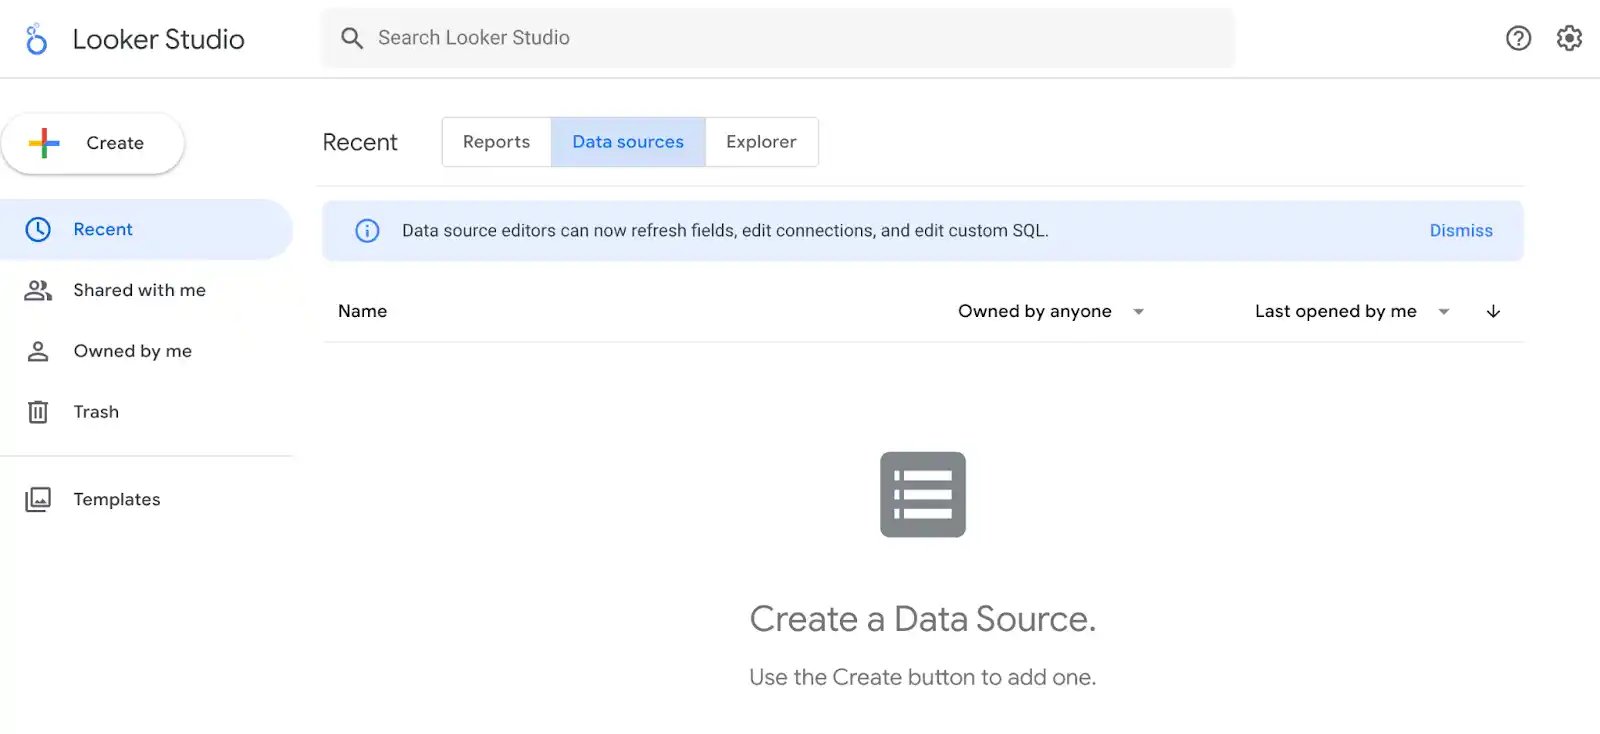 How to Use Google Looker Studio: Data sources